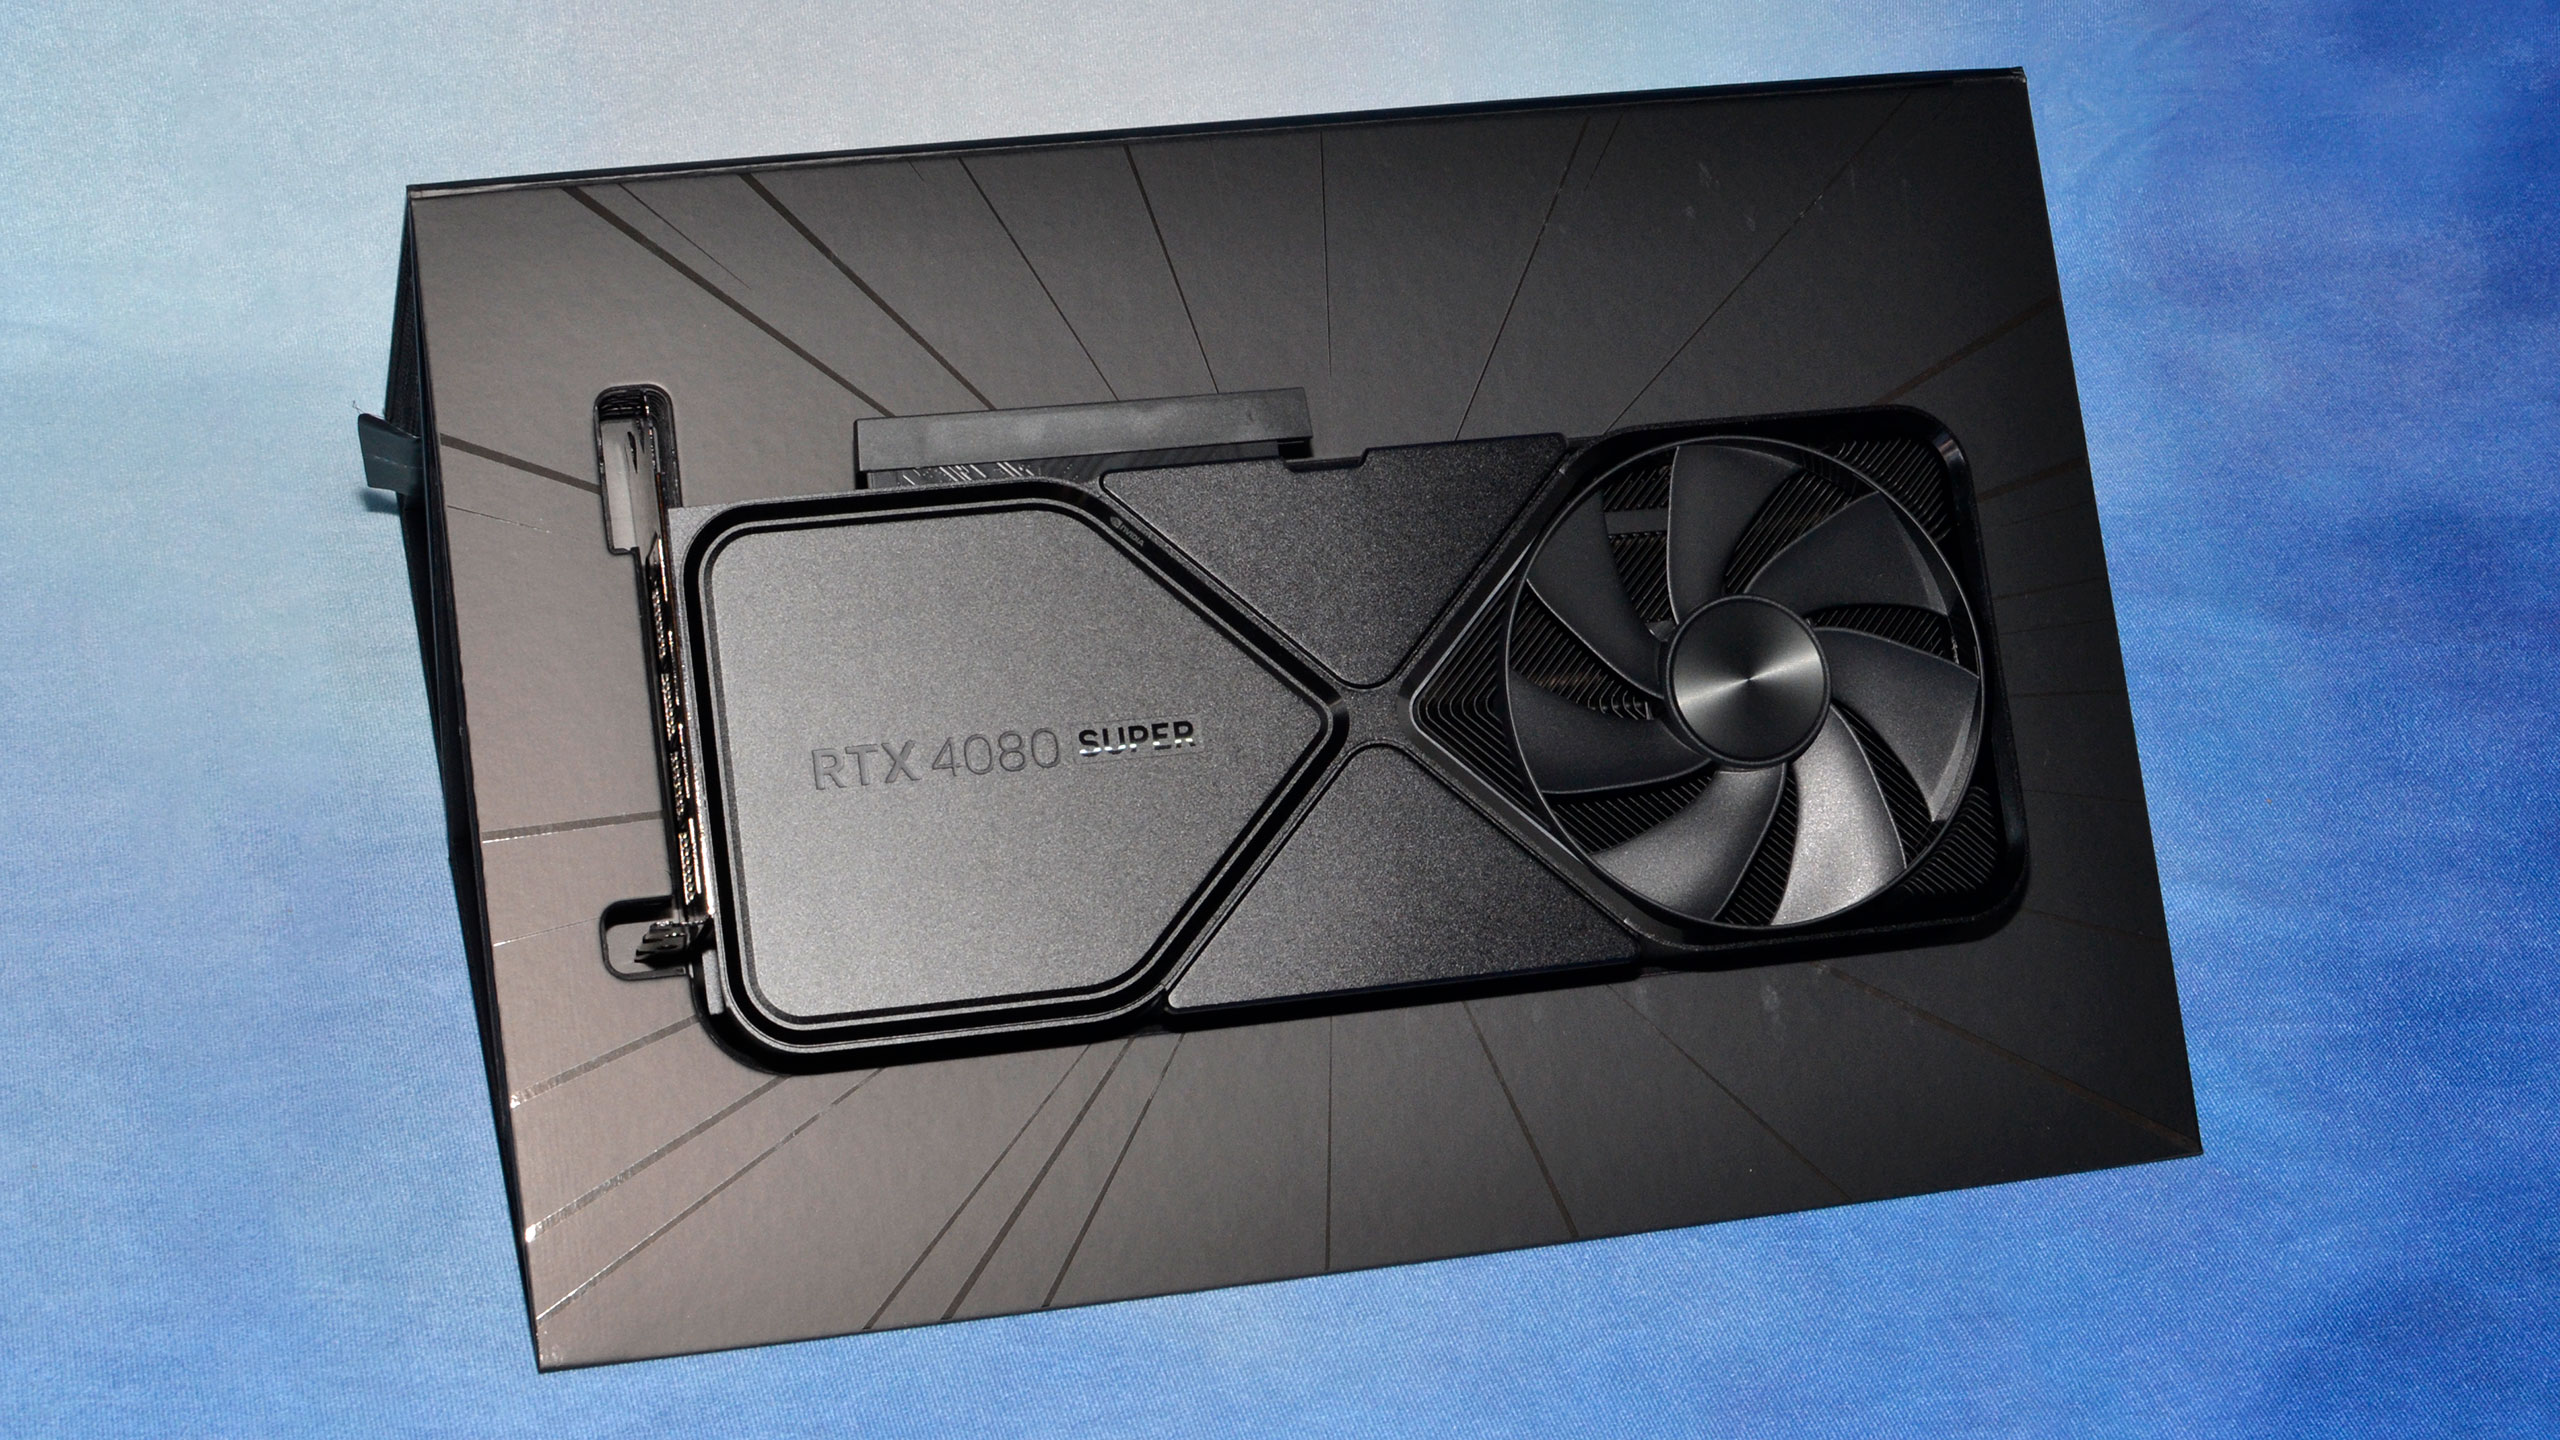 Nvidia GeForce RTX 4080 Super review: Slightly faster than the